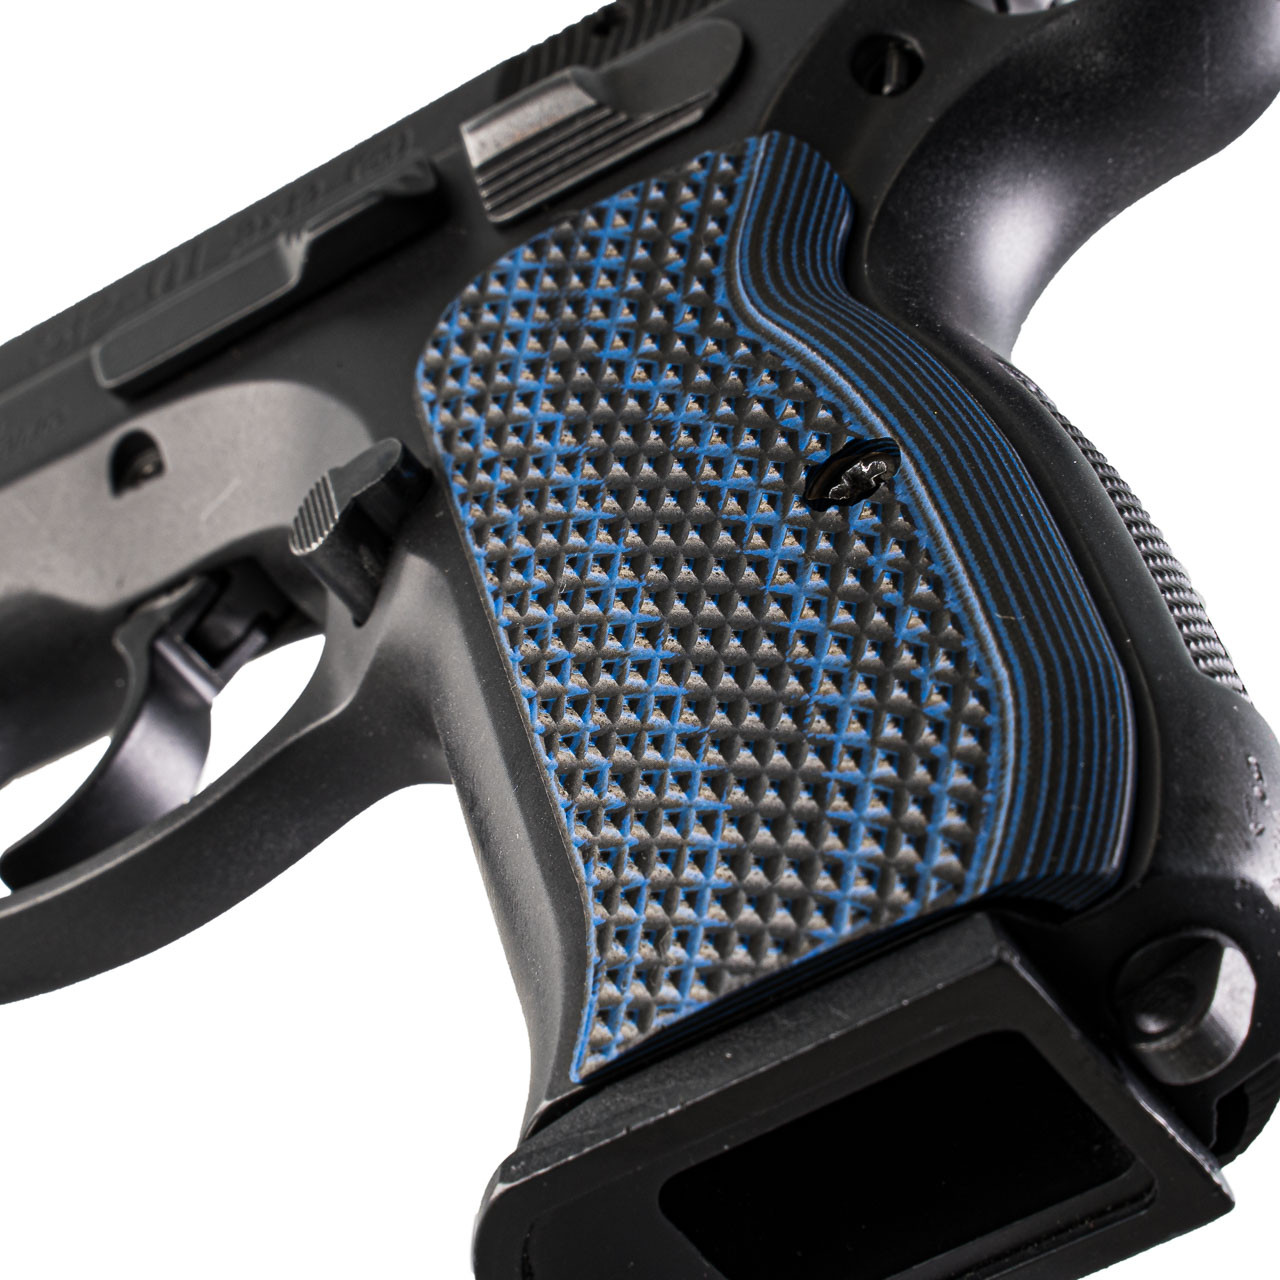 CZ 75 Grips (G10) with Diamond Back Texture | Made in USA